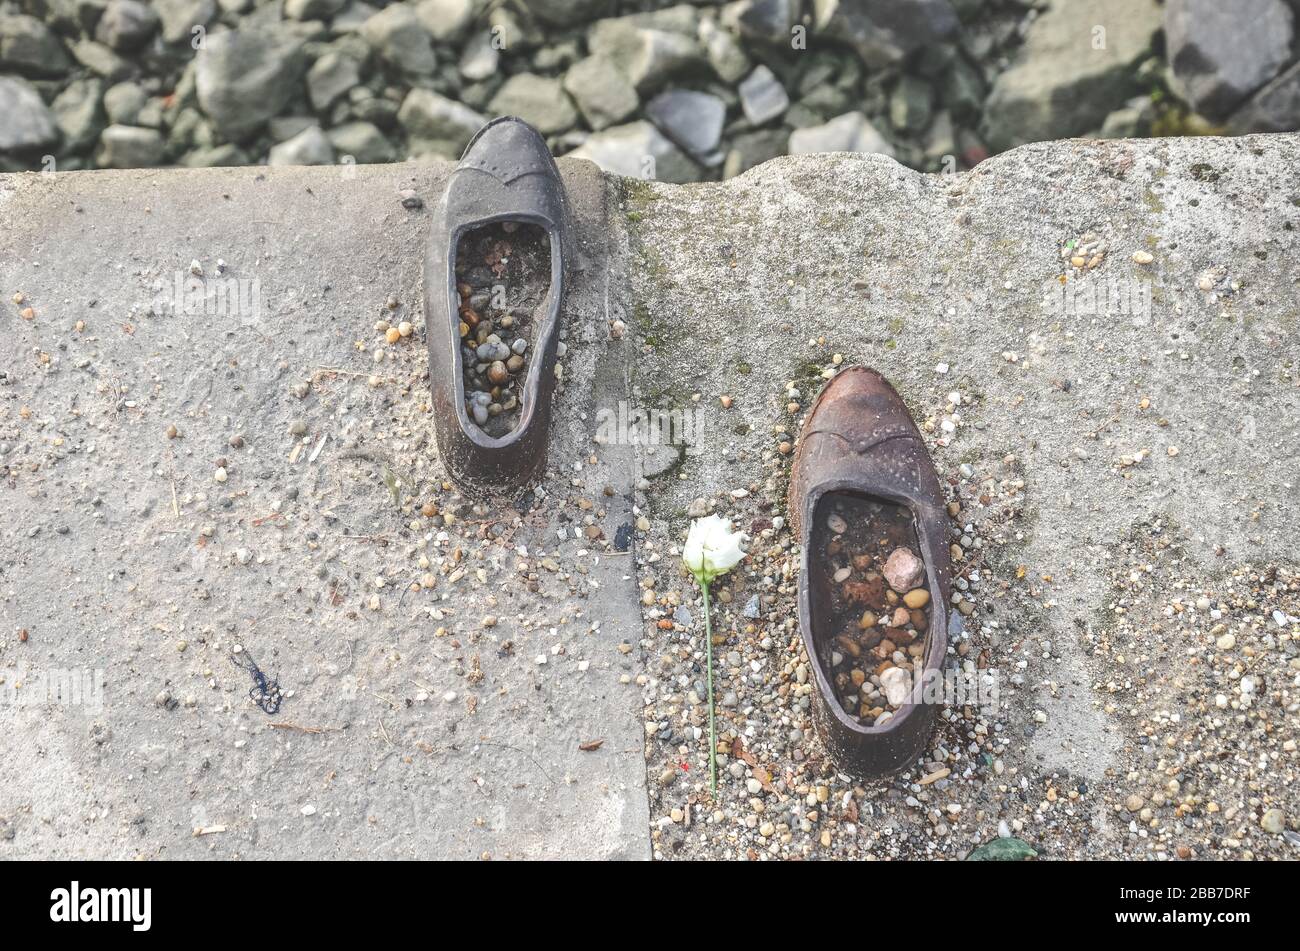 Budapest, Hungary - Nov 6, 2019: Shoes on the Danube Bank. Monument to honor the Jews who were killed by fascists during World War II. Iron shoes with flower photographed from above. Horizontal photo. Stock Photo